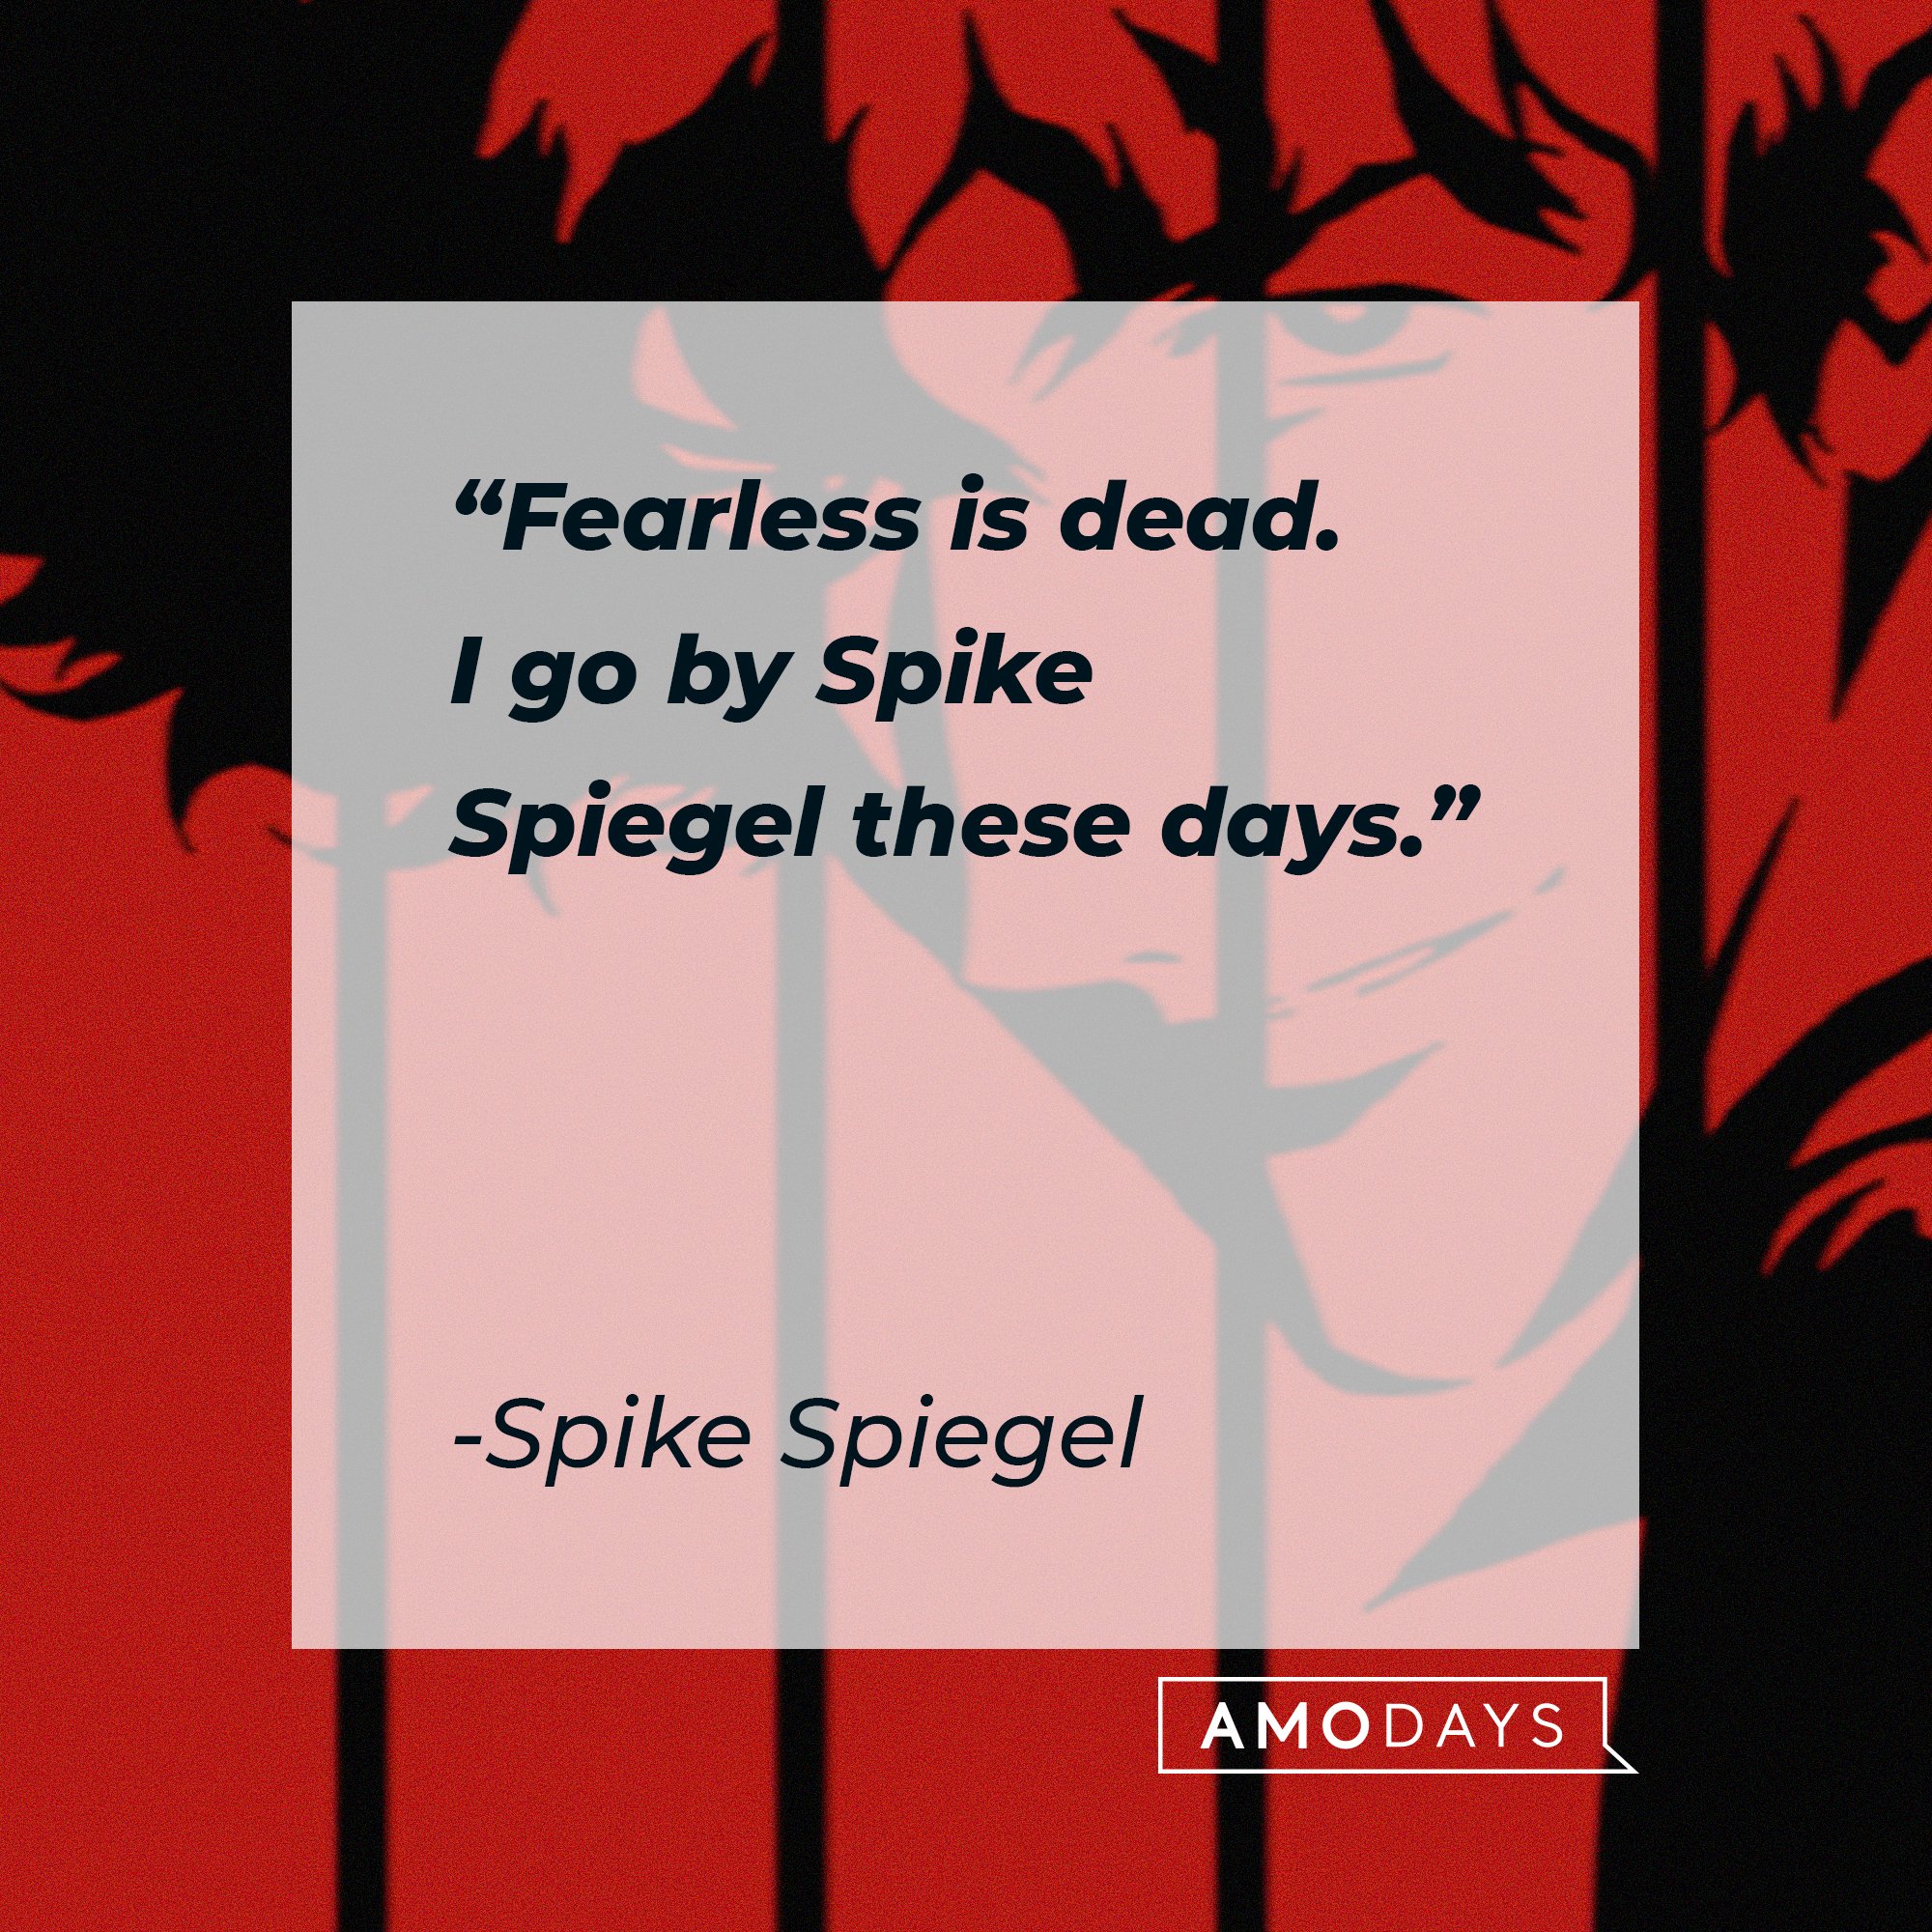 Spike Spiegel's quote: "Fearless is dead. I go by Spike Spiegel these days." | Image: AmoDays 